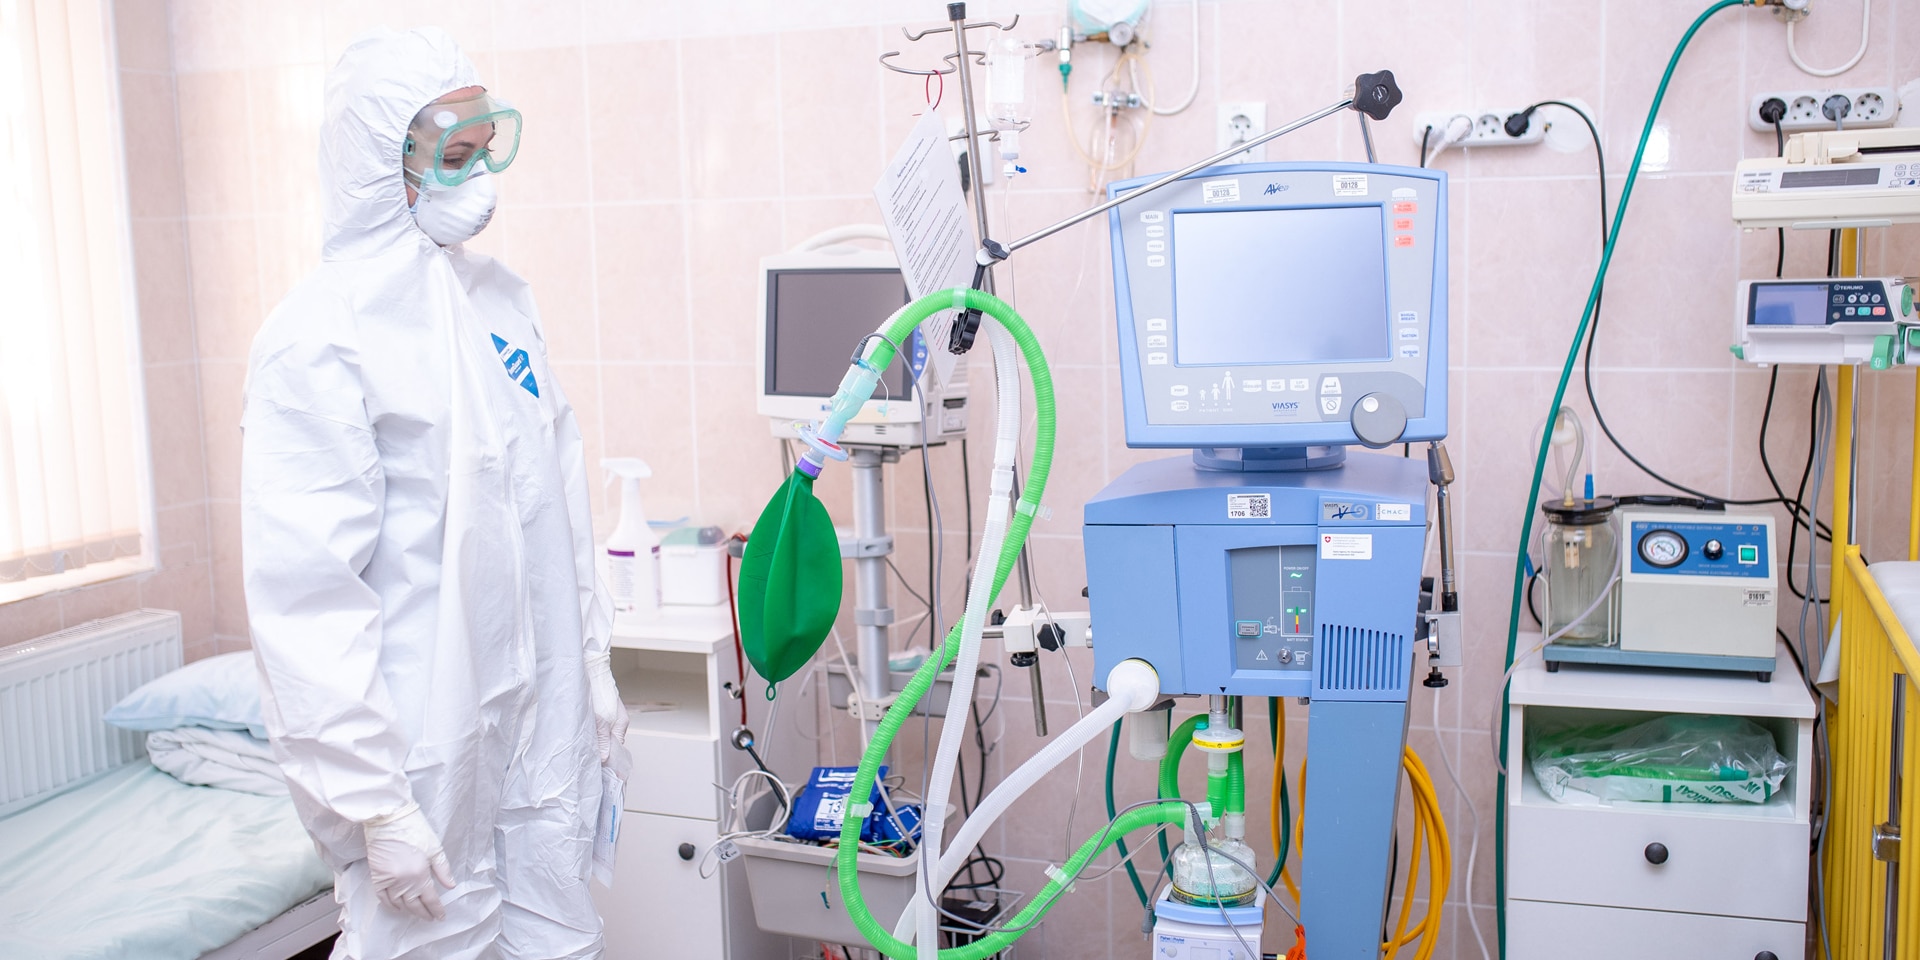 A nurse in protective clothing stands next to a ventilator used to treat acute COVID-19 cases. 